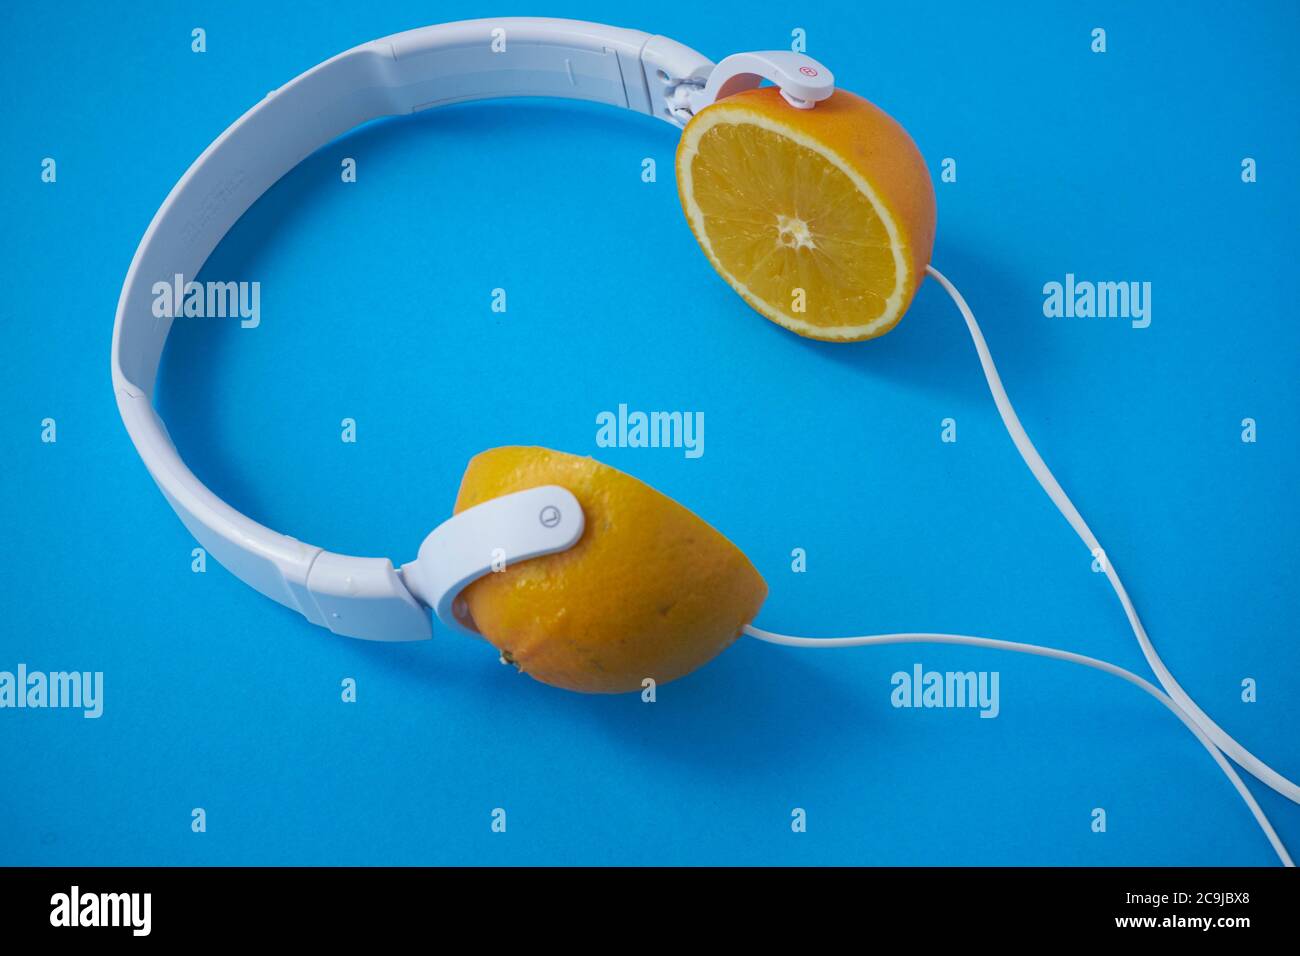 Headphones with lemons against a blue background. Stock Photo